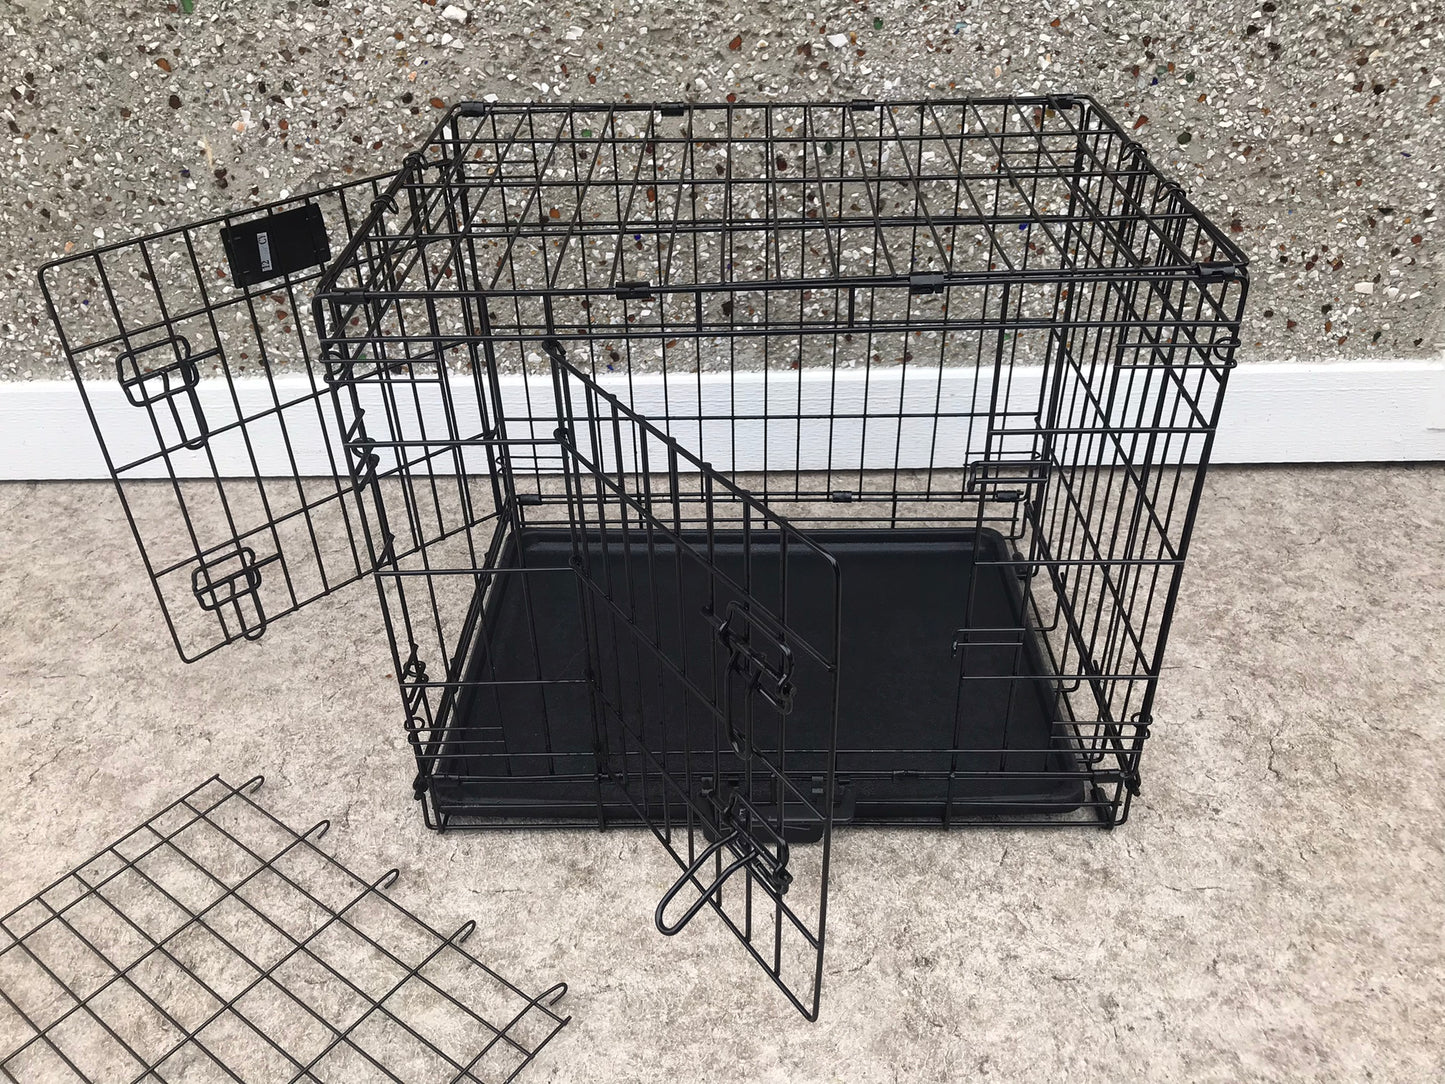 My Little Pet Shop Dog Puppy Pet Crate All Metal With Base 2 Doors and Extra Slat for Seperation As New Excellent 24 x 18 x 21 Up to 20 lb